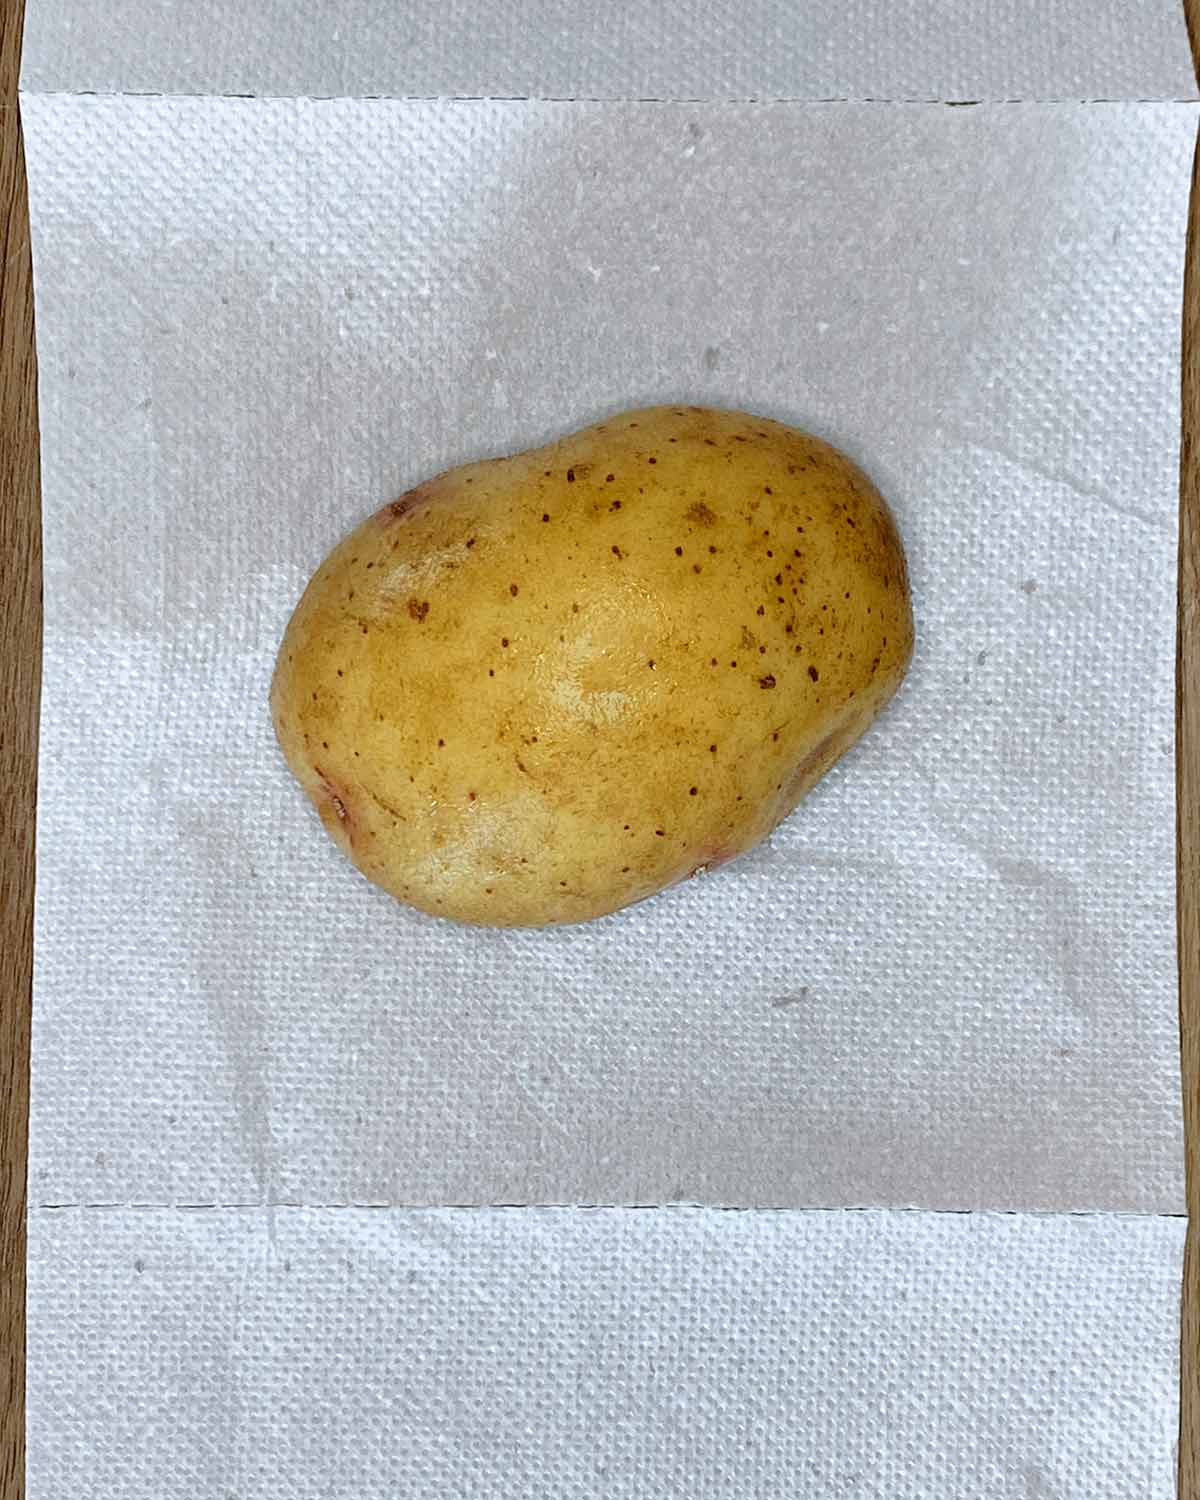 A washed potato on some kitchen towel.